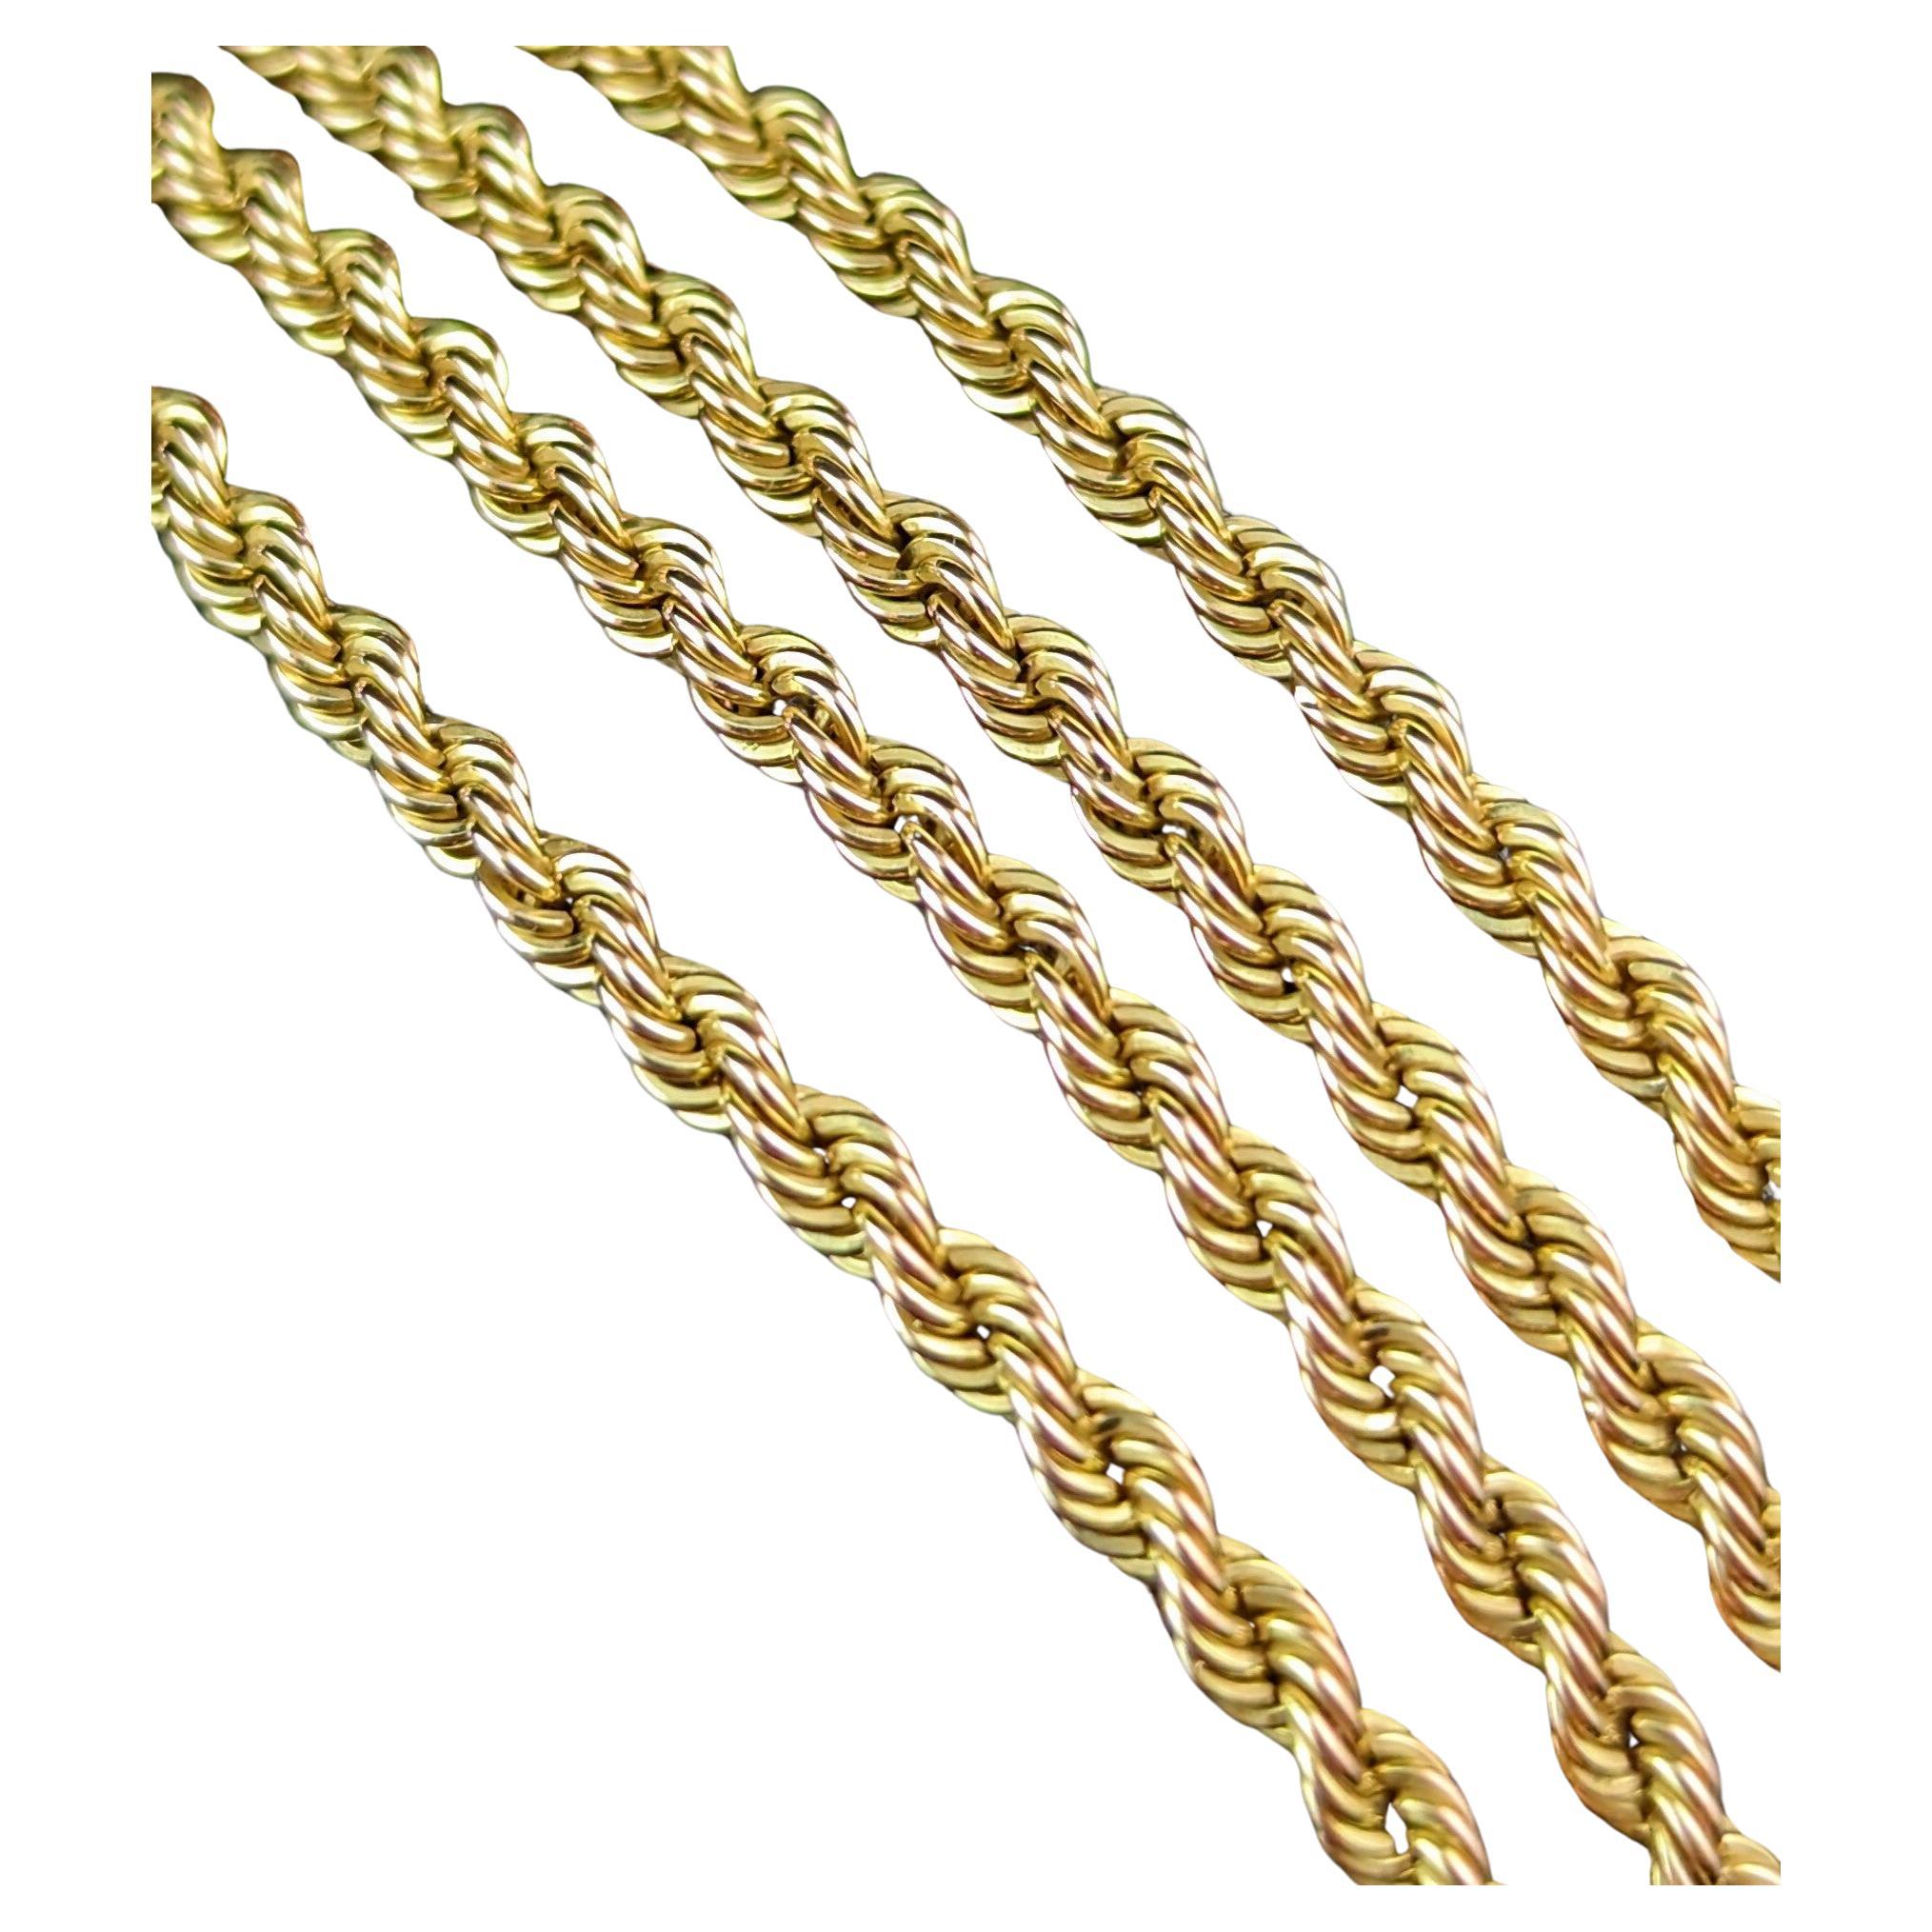 Vintage 9k yellow gold rope twist link chain necklace For Sale